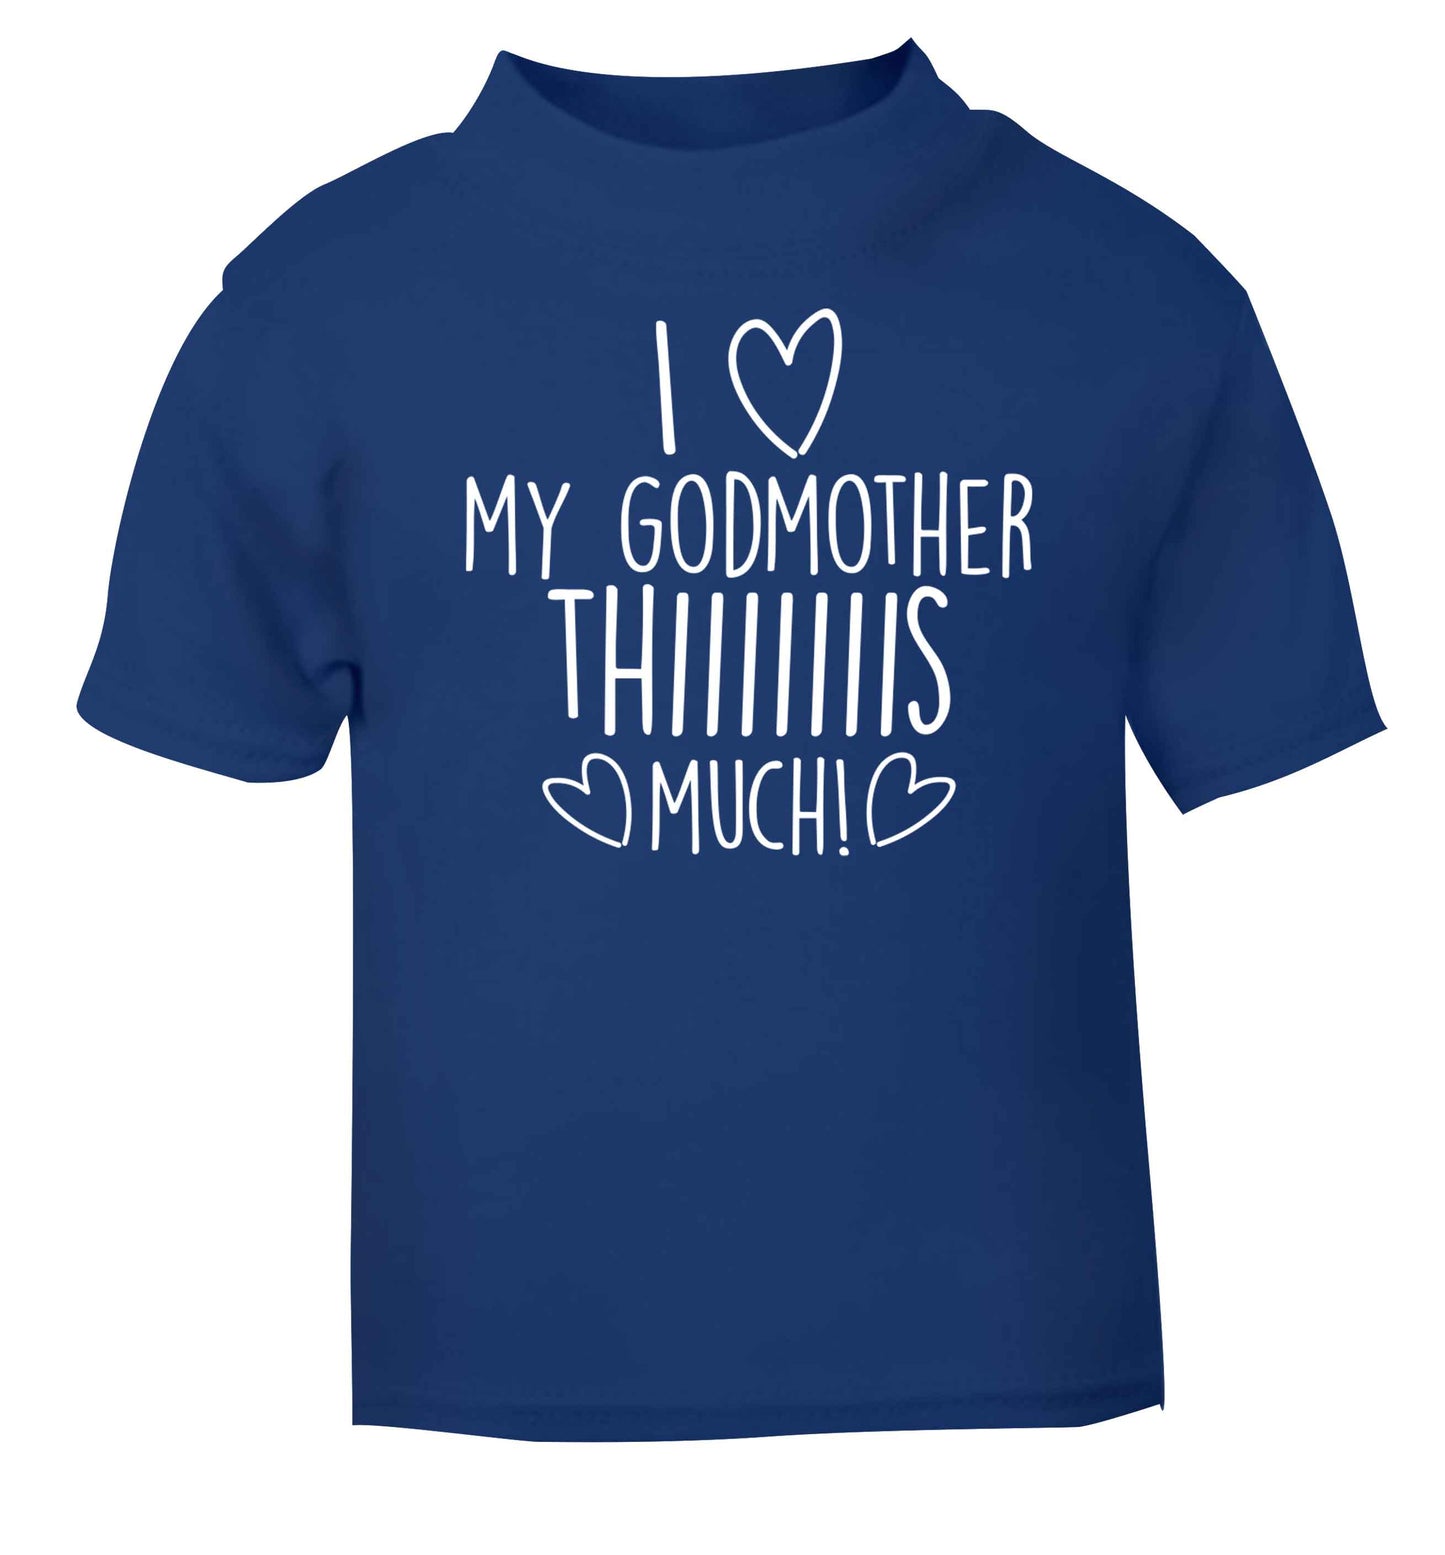 I love my Godmother this much blue baby toddler Tshirt 2 Years